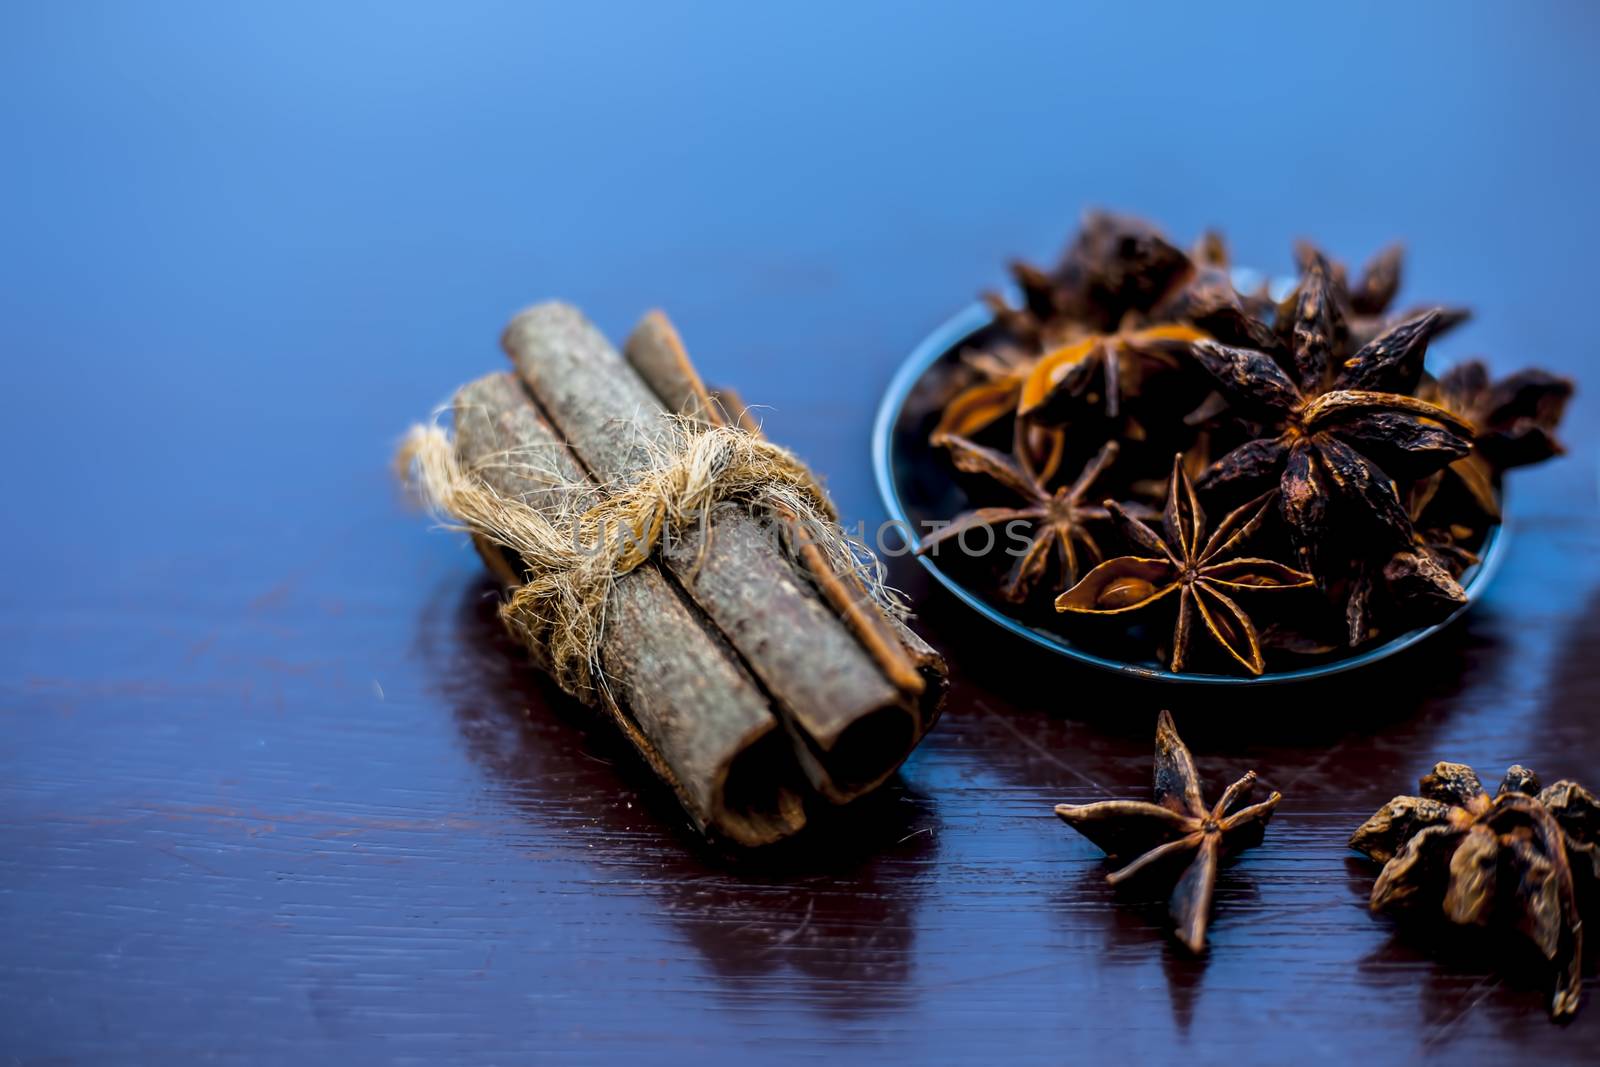 Face mask for wrinkles on the wooden surface consisting of some cinnamon sticks, water, and star anise seed powder.